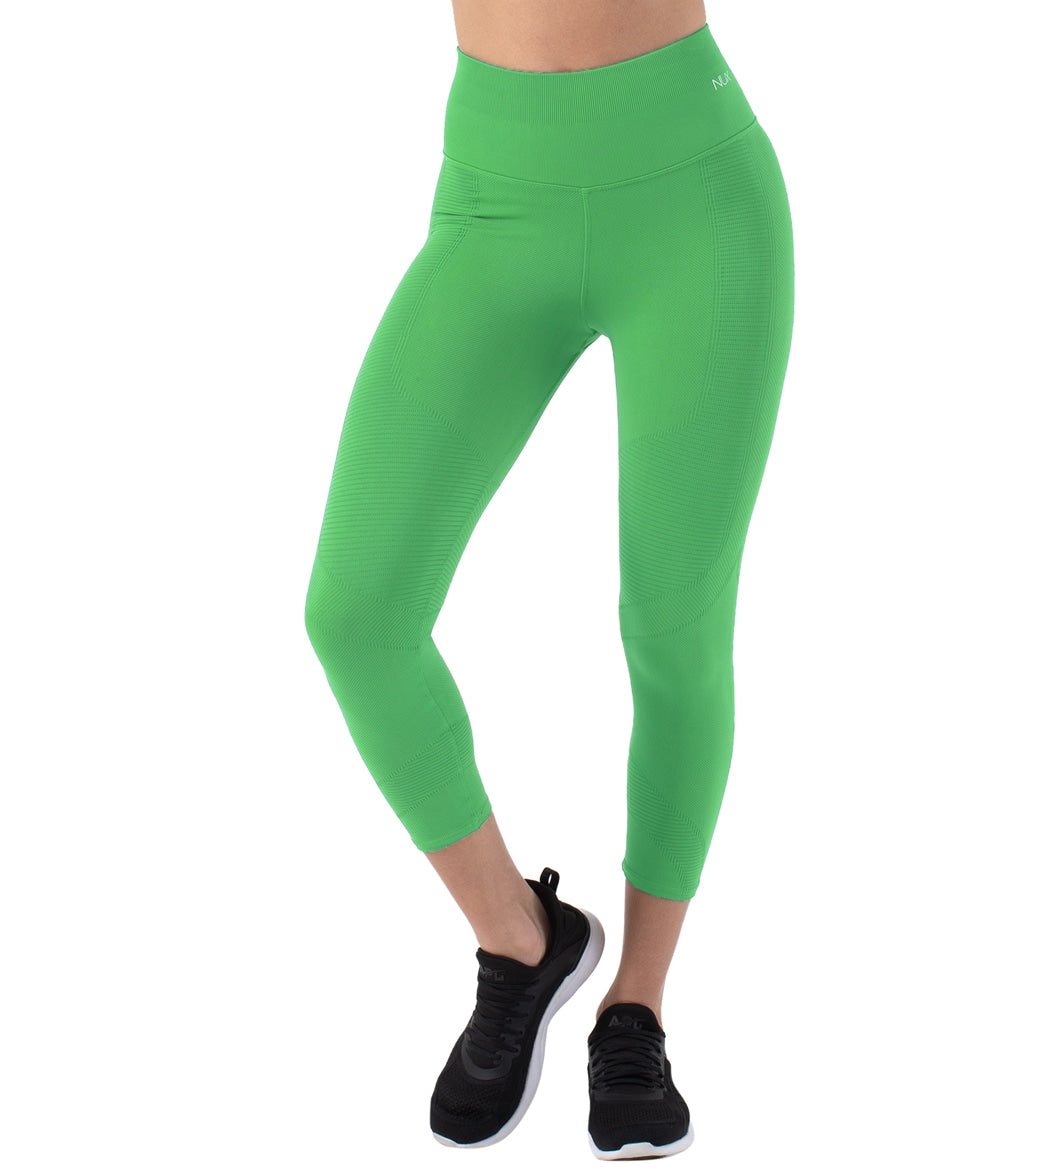 NUX One by One 7/8 Legging - Simply Green - Spandex